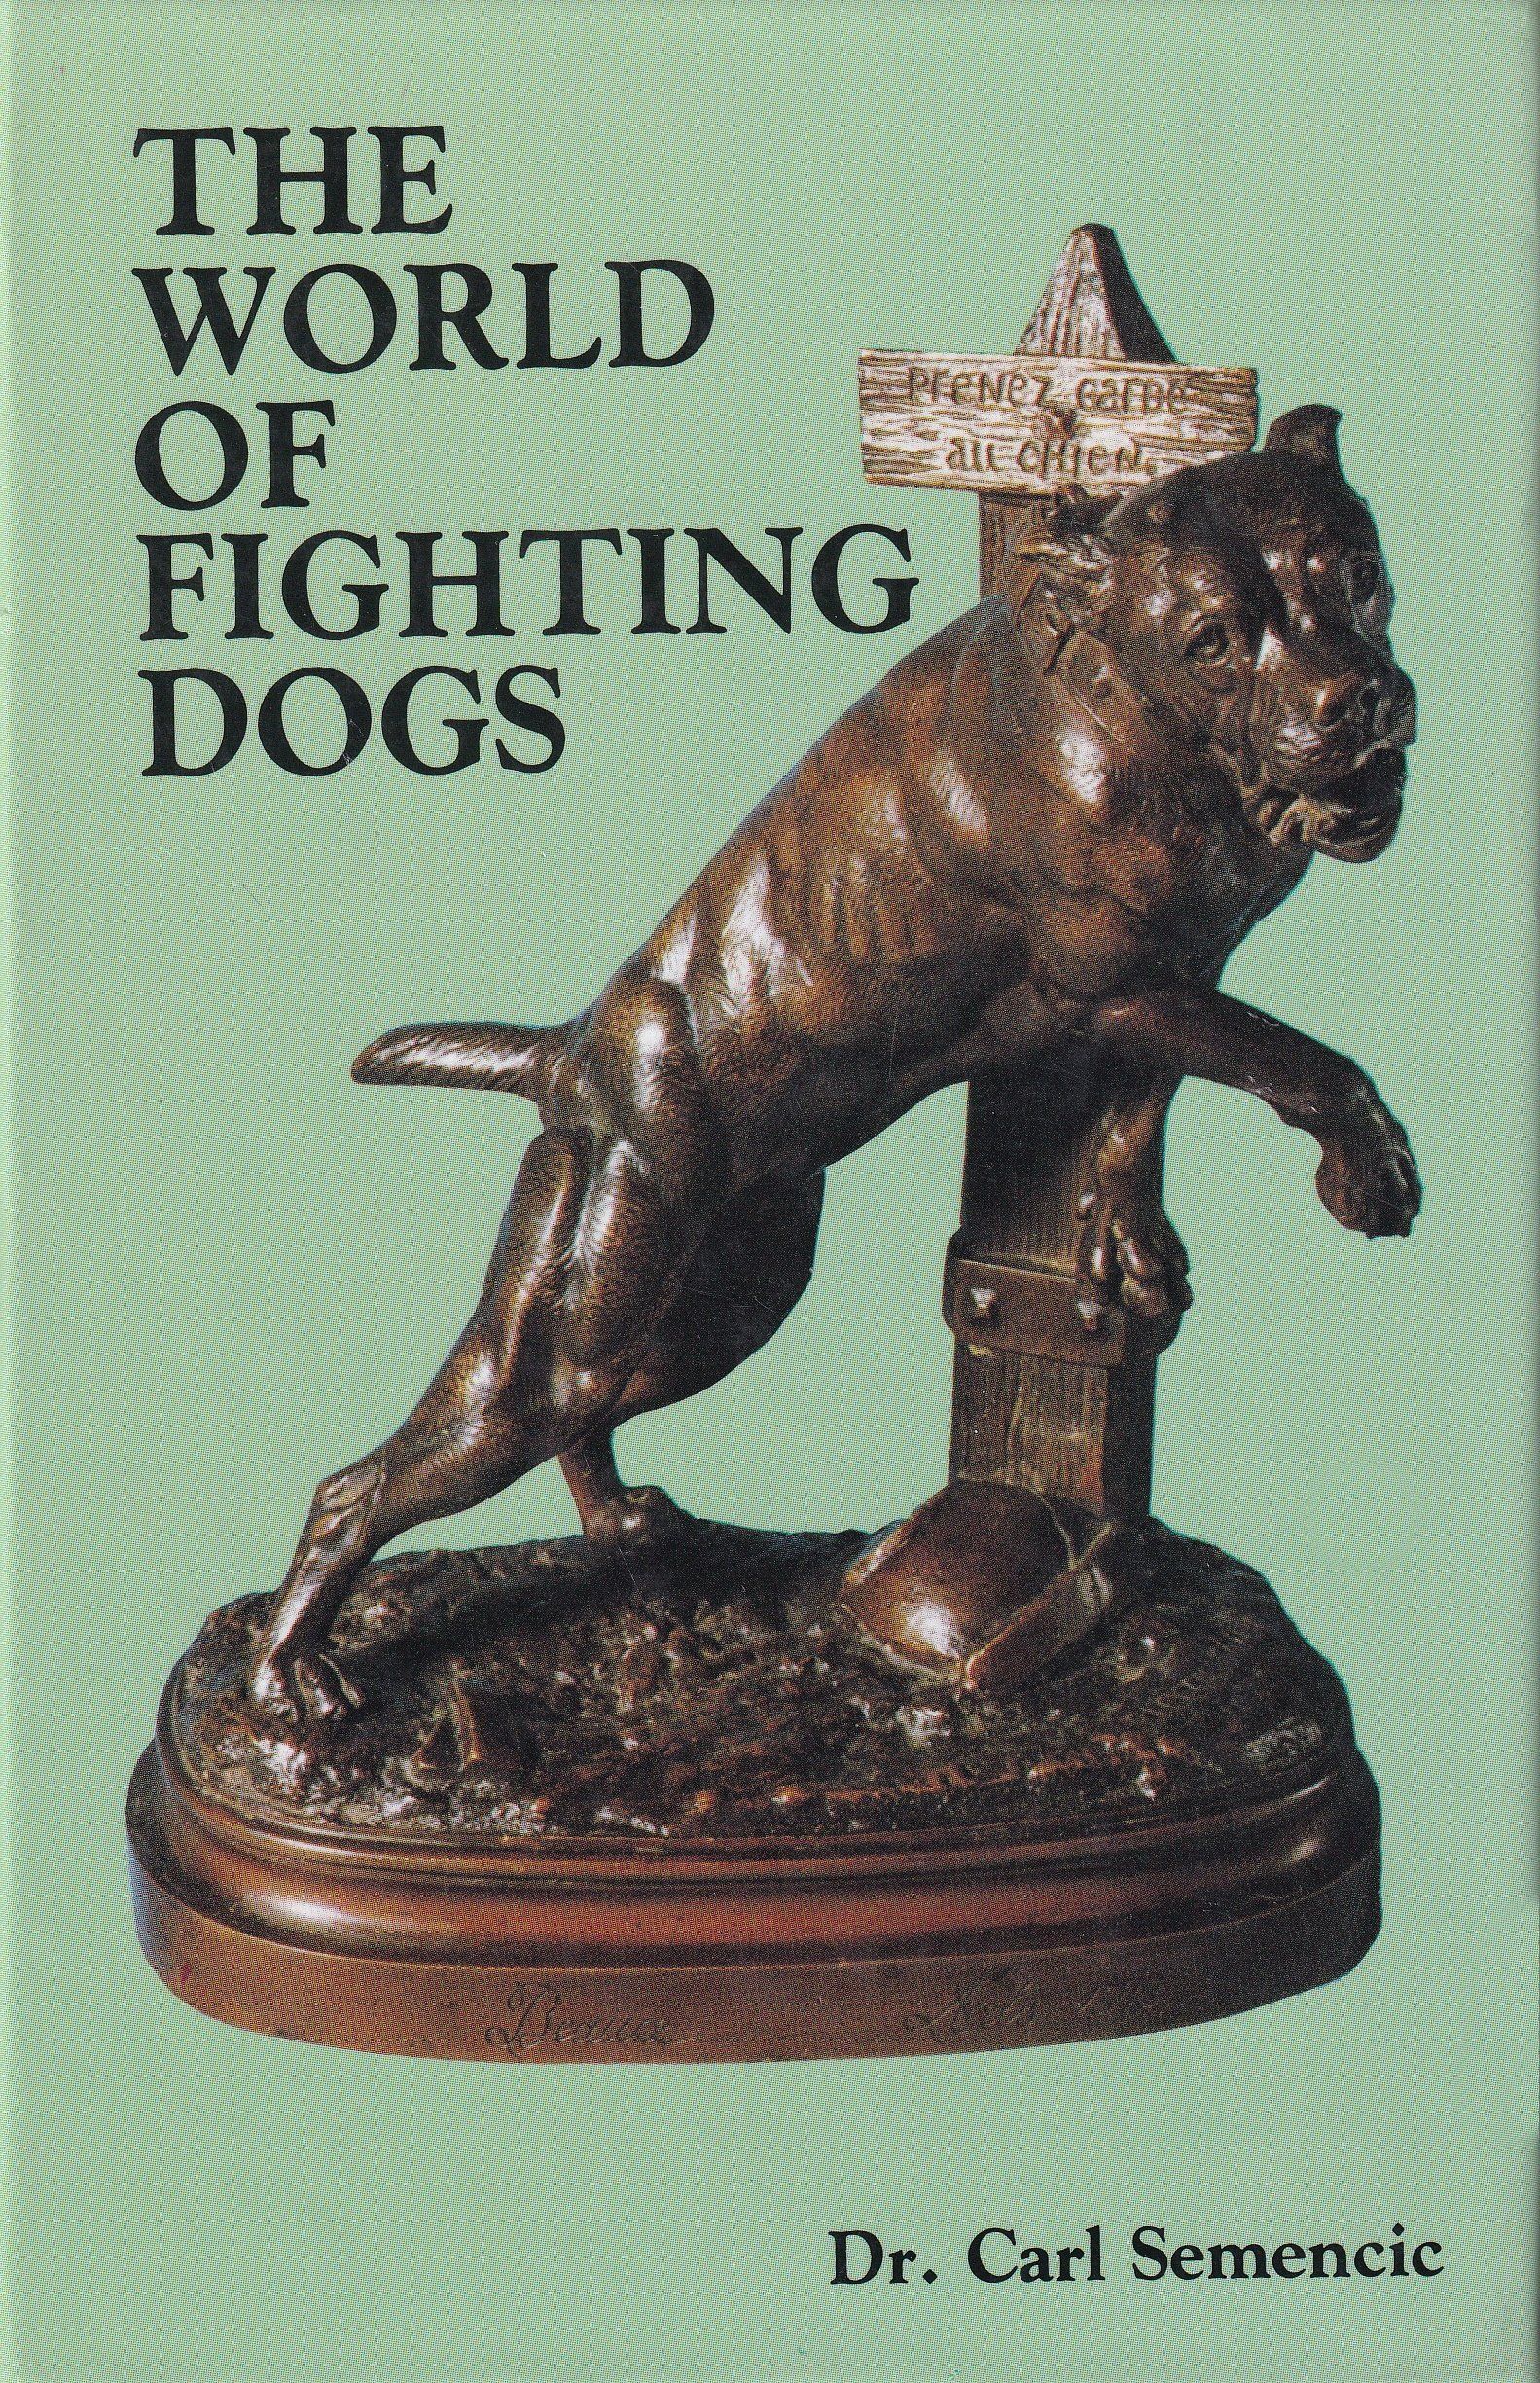 The World of Fighting Dogs by Dr Carl Semencic